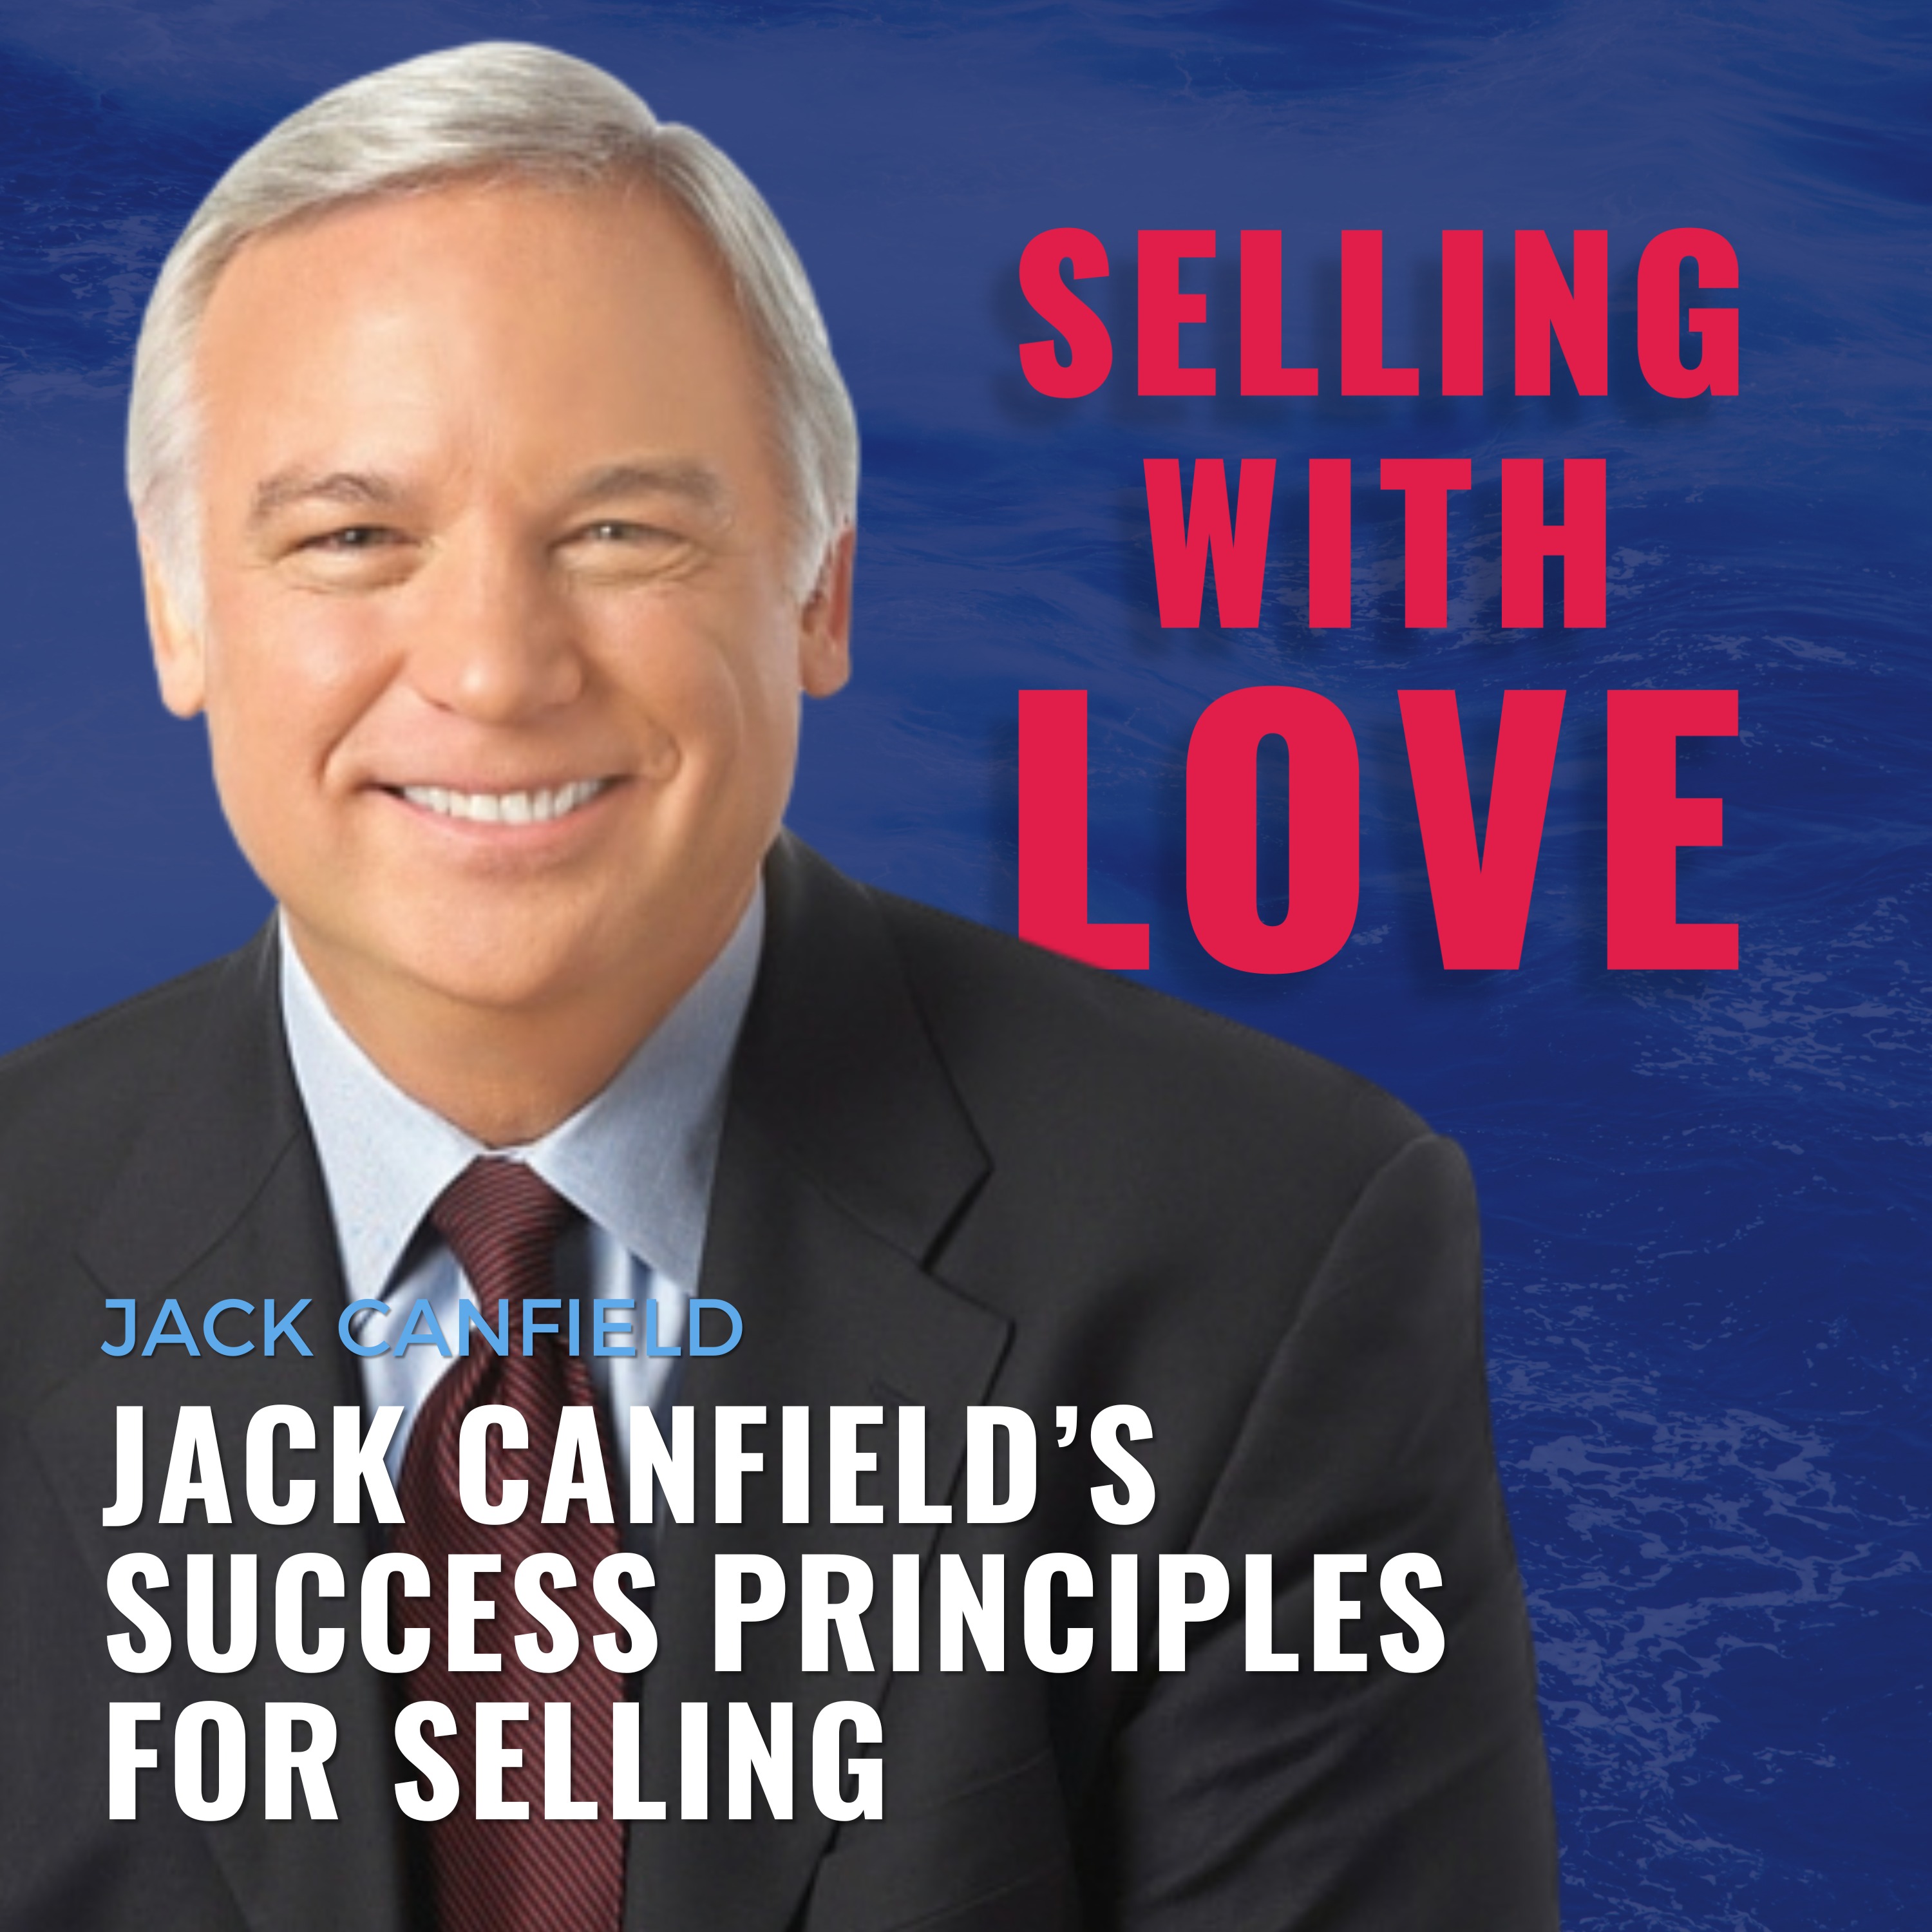 Jack Canfield’s Success Principles for Selling